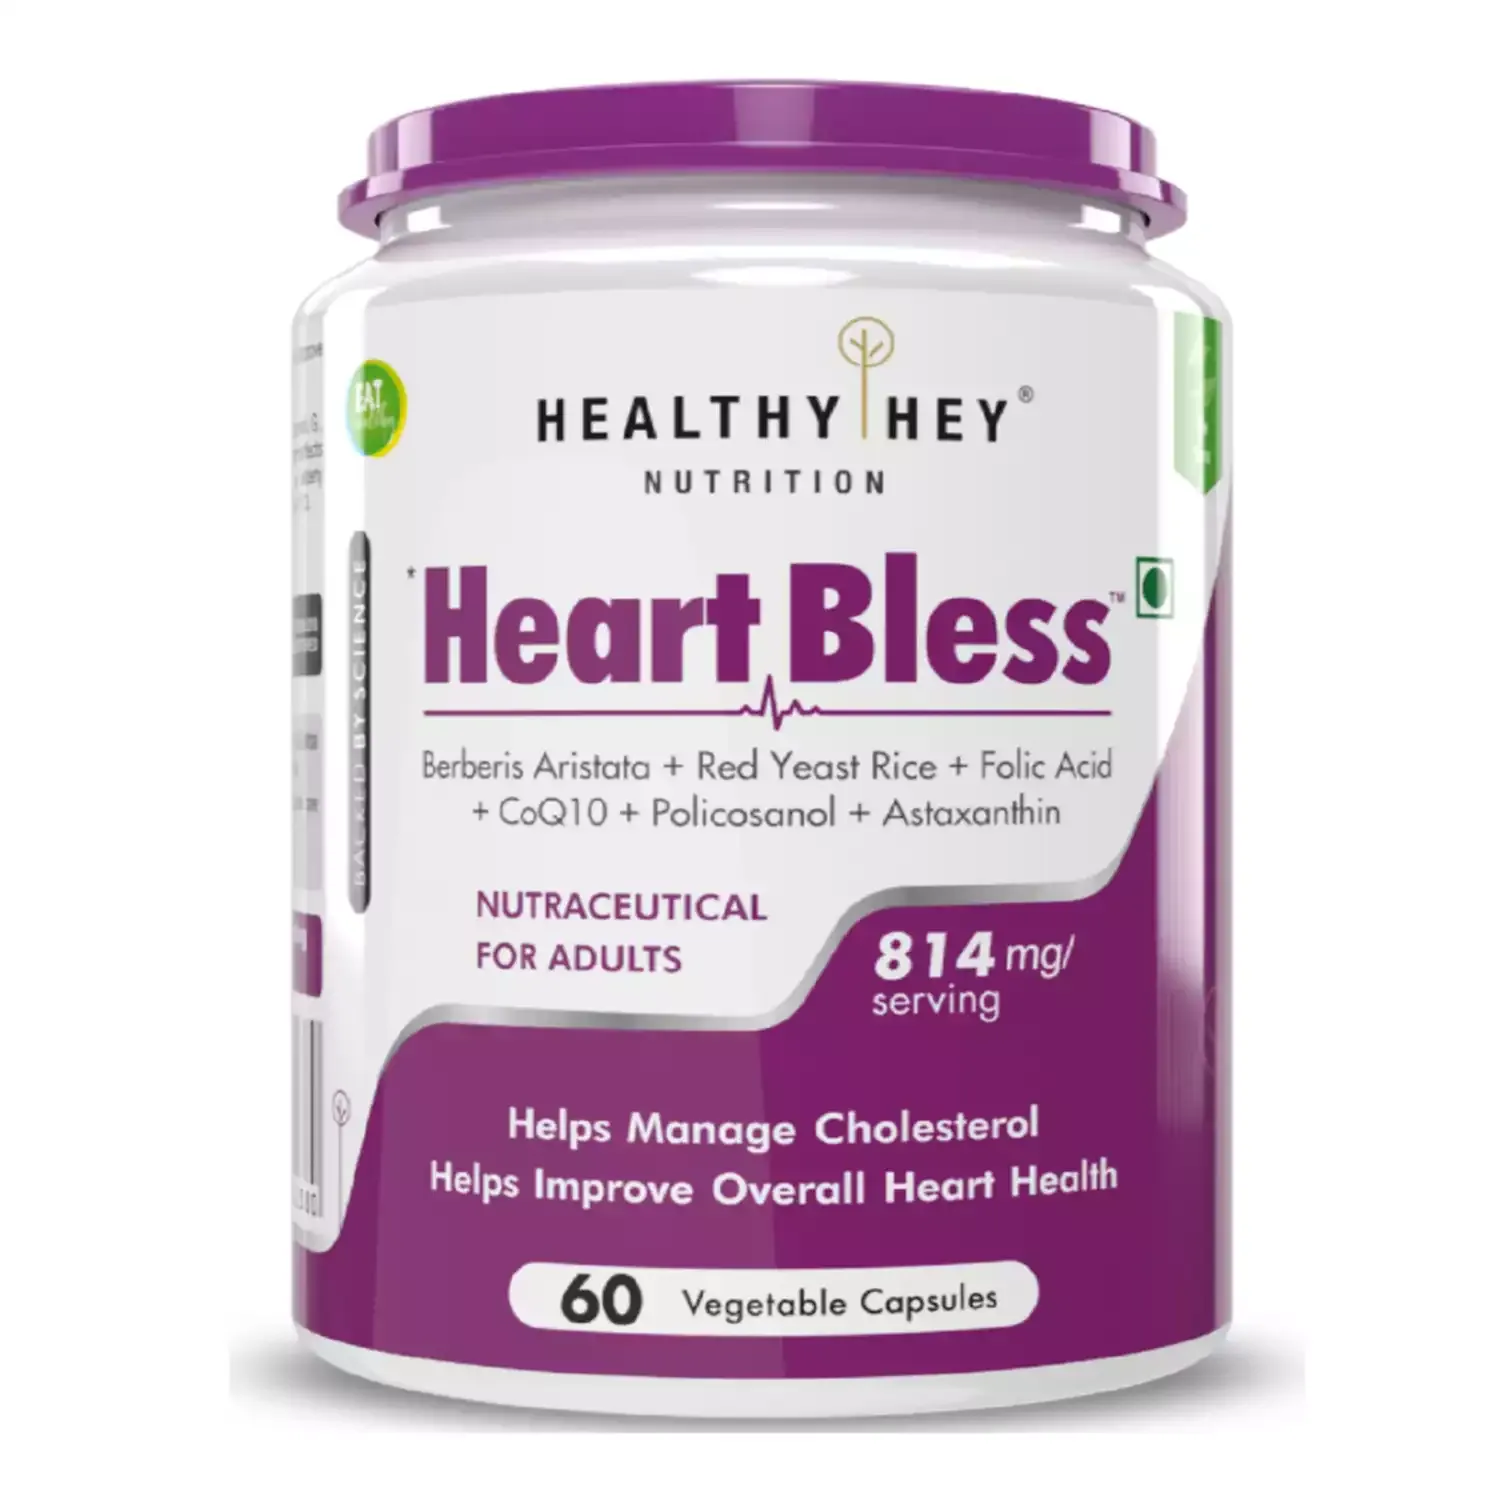 HealthyHey Nutrition Heart Bless (60 Vegetable Capsules)